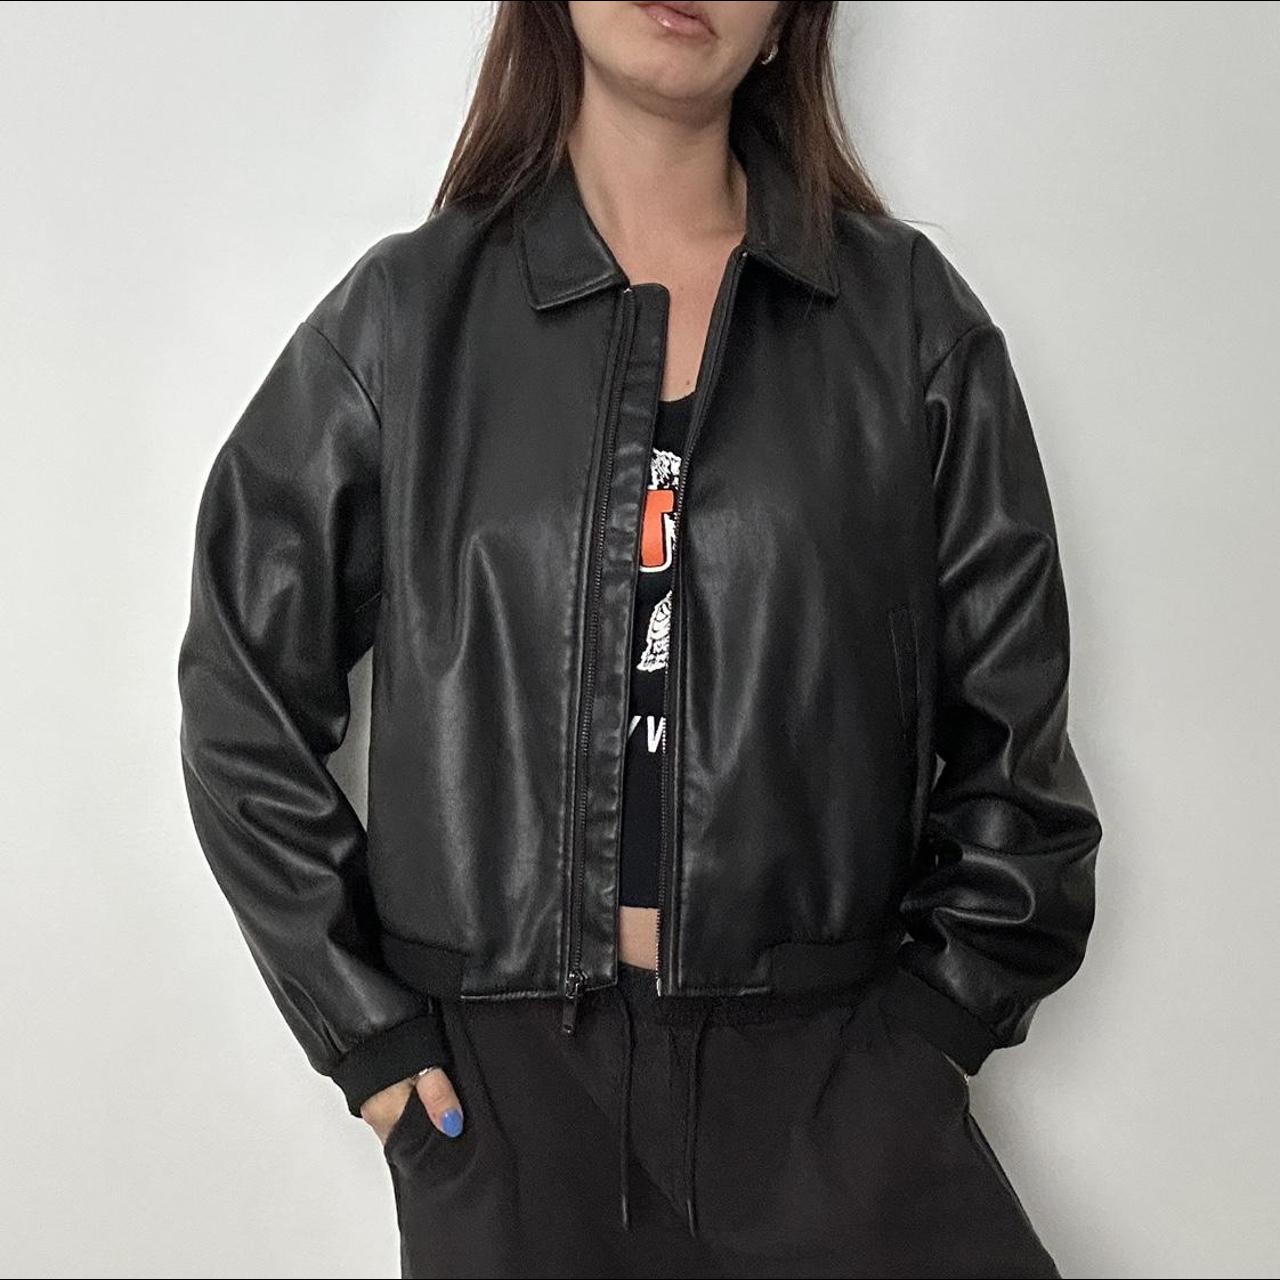 Flowers and leather jacket! A beautiful fuex leather - Depop